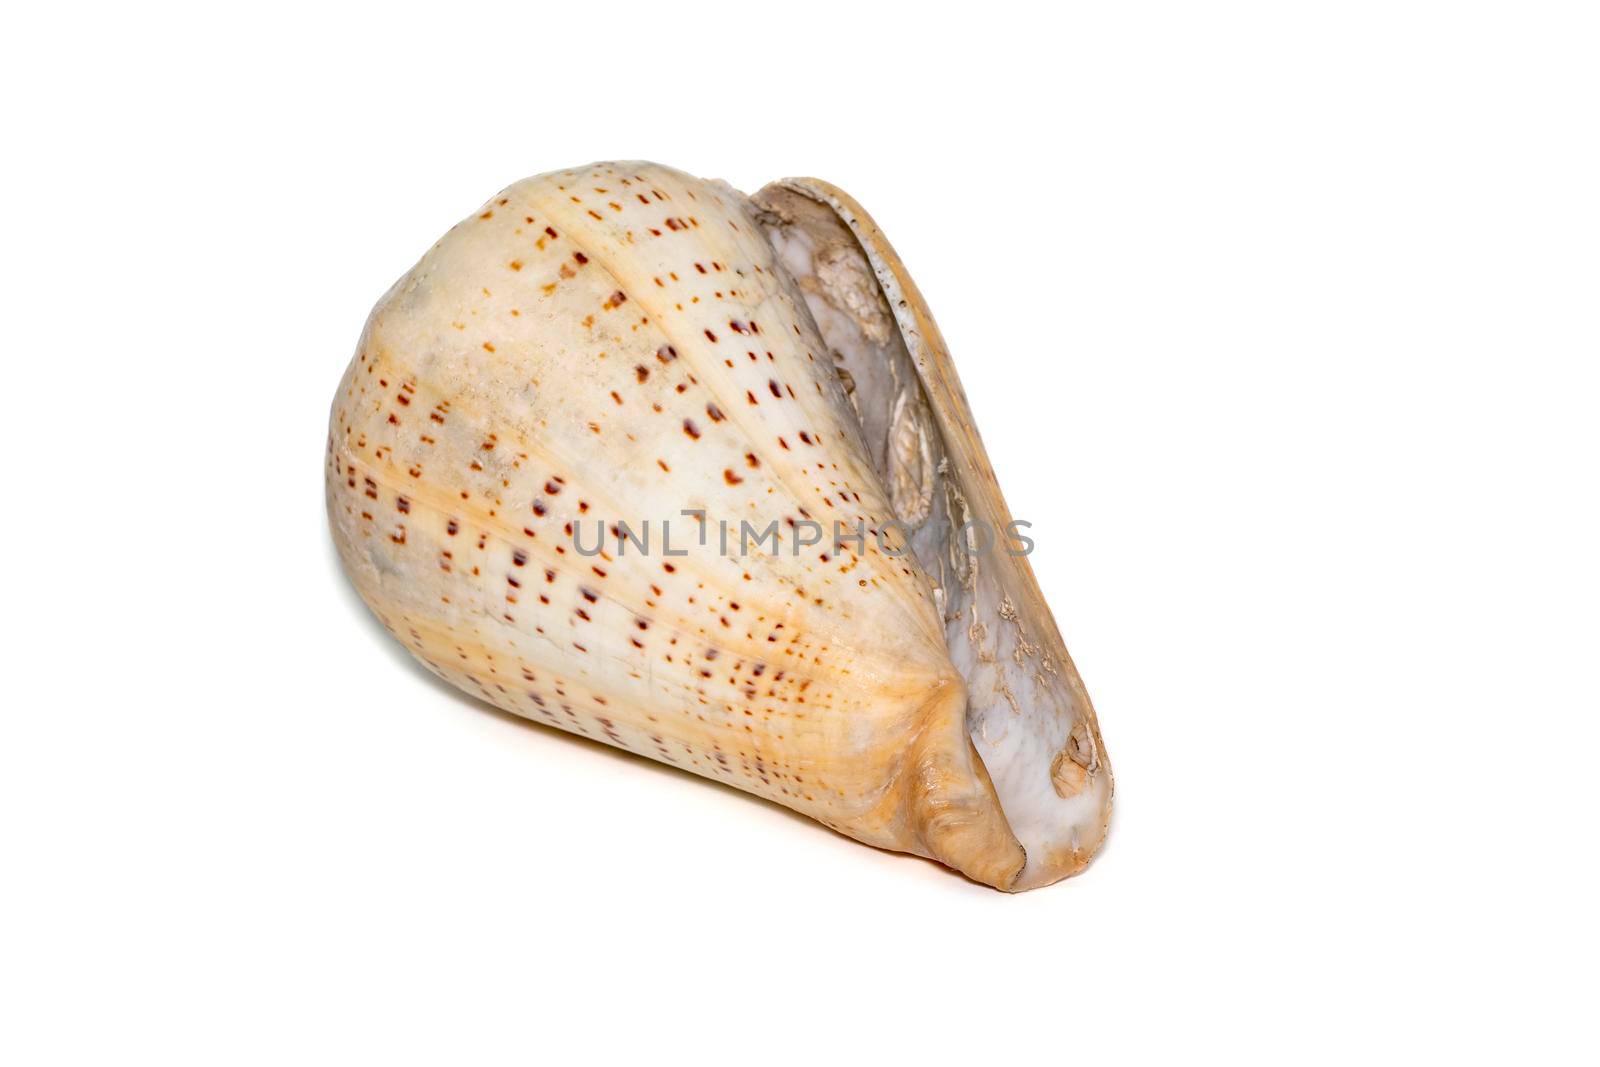 Conus betulinus, common name the betuline cone, is a species of sea snail, a marine gastropod mollusk in the family Conidae, the cone snails and their allies. by yod67